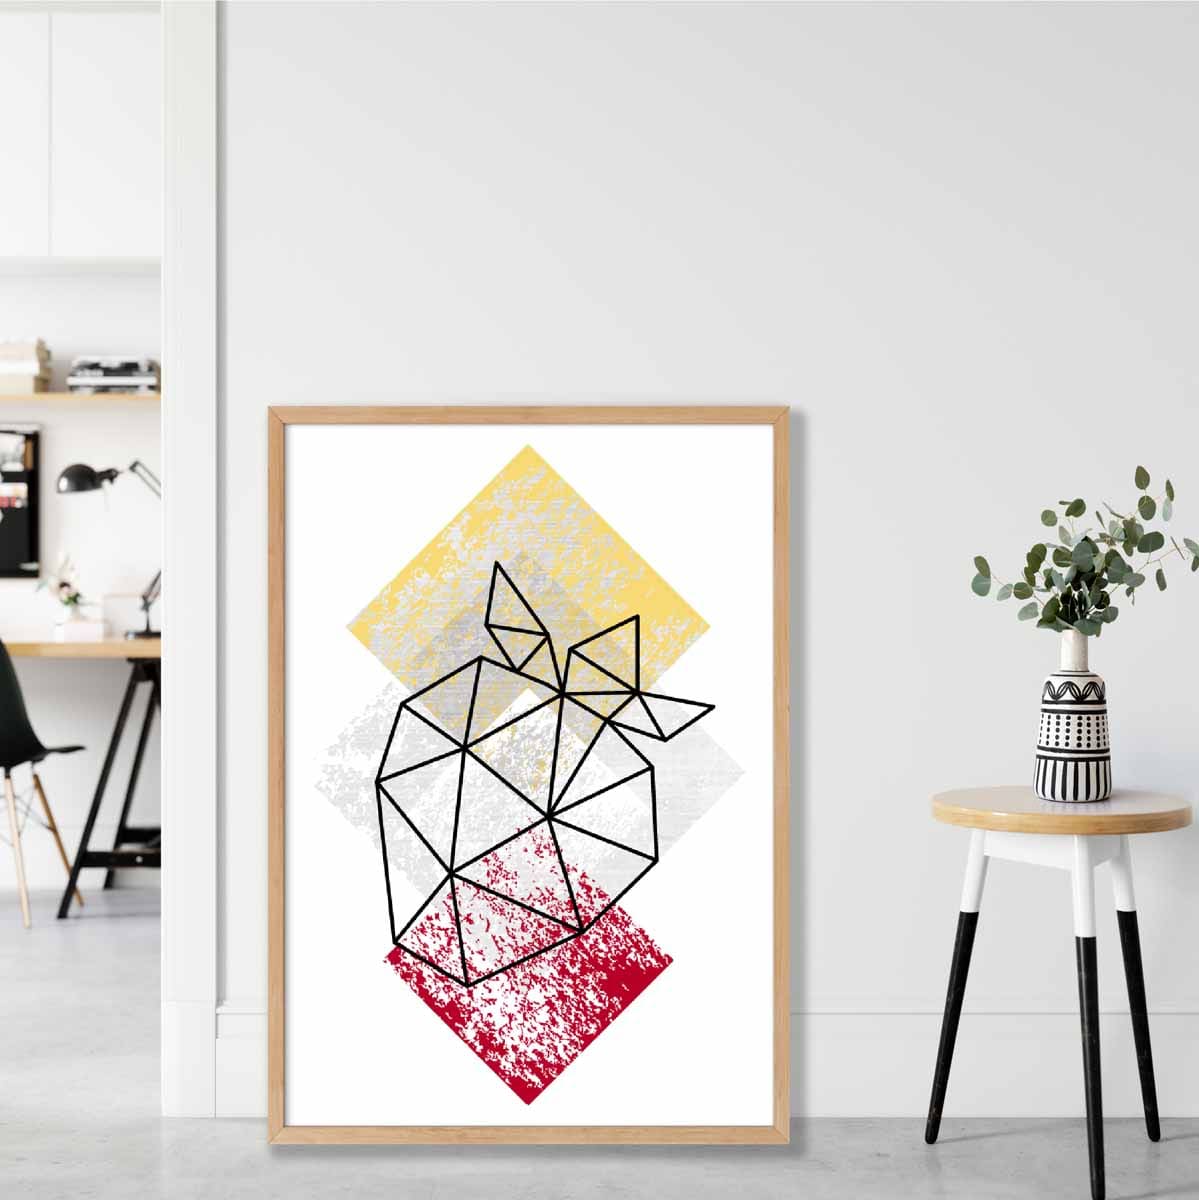 Geometric Fruit Line art Poster of Strawberry Textured Yellow Grey Red